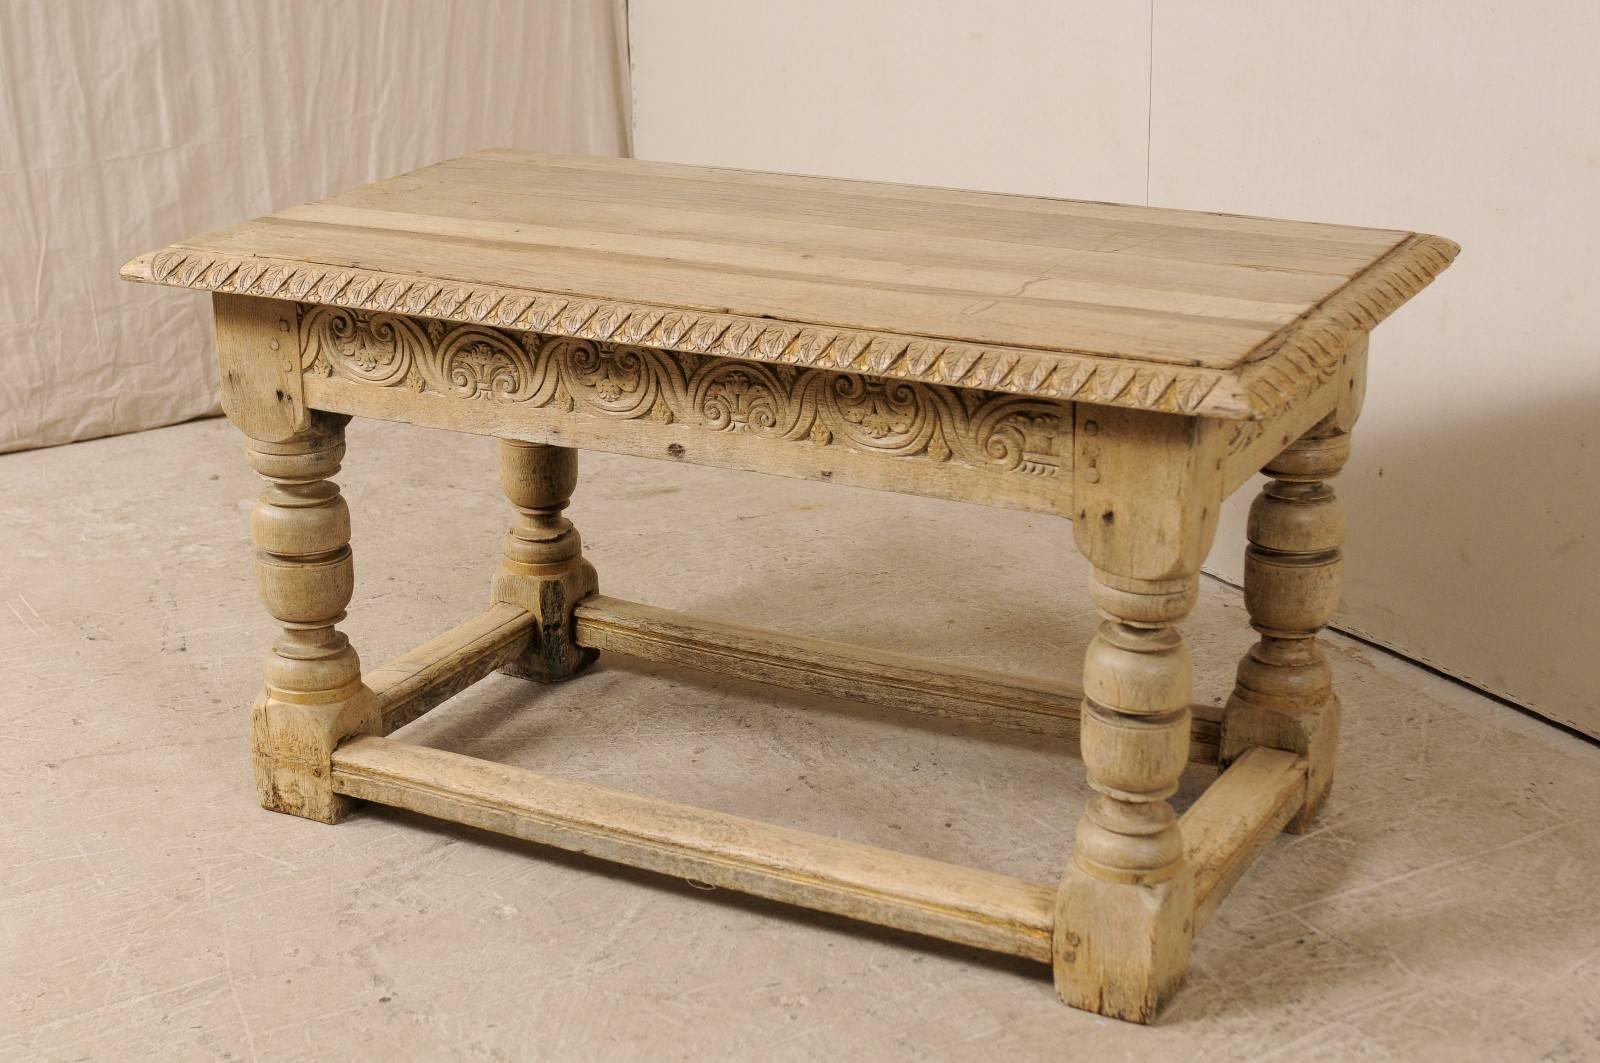 Wood French 19th C. Table w/ Robust Baluster Legs & Nicely Carved and Adorn Apron